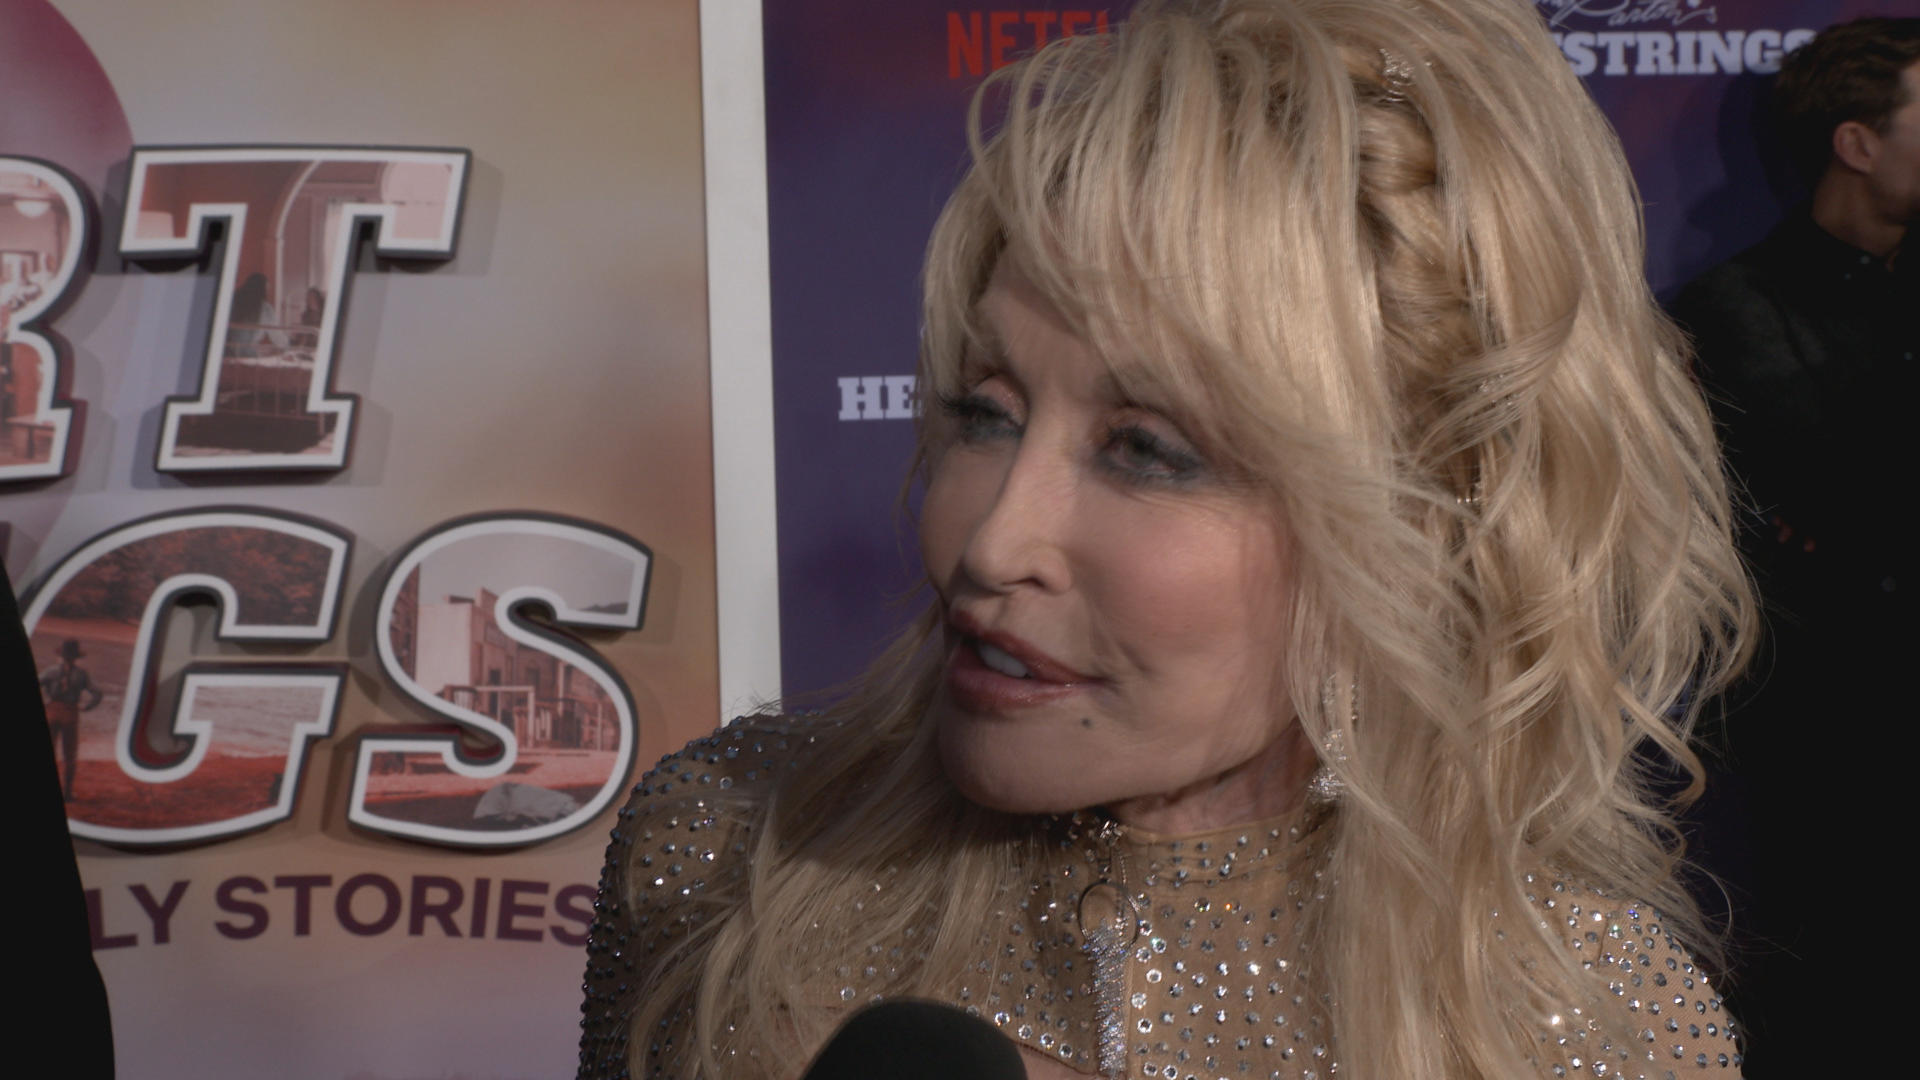 Kelli Gillespie hit the red carpet for the premiere of Heartstrings and talked to Dolly herself along with Julianne Hough and Kimberly Williams-Paisley.